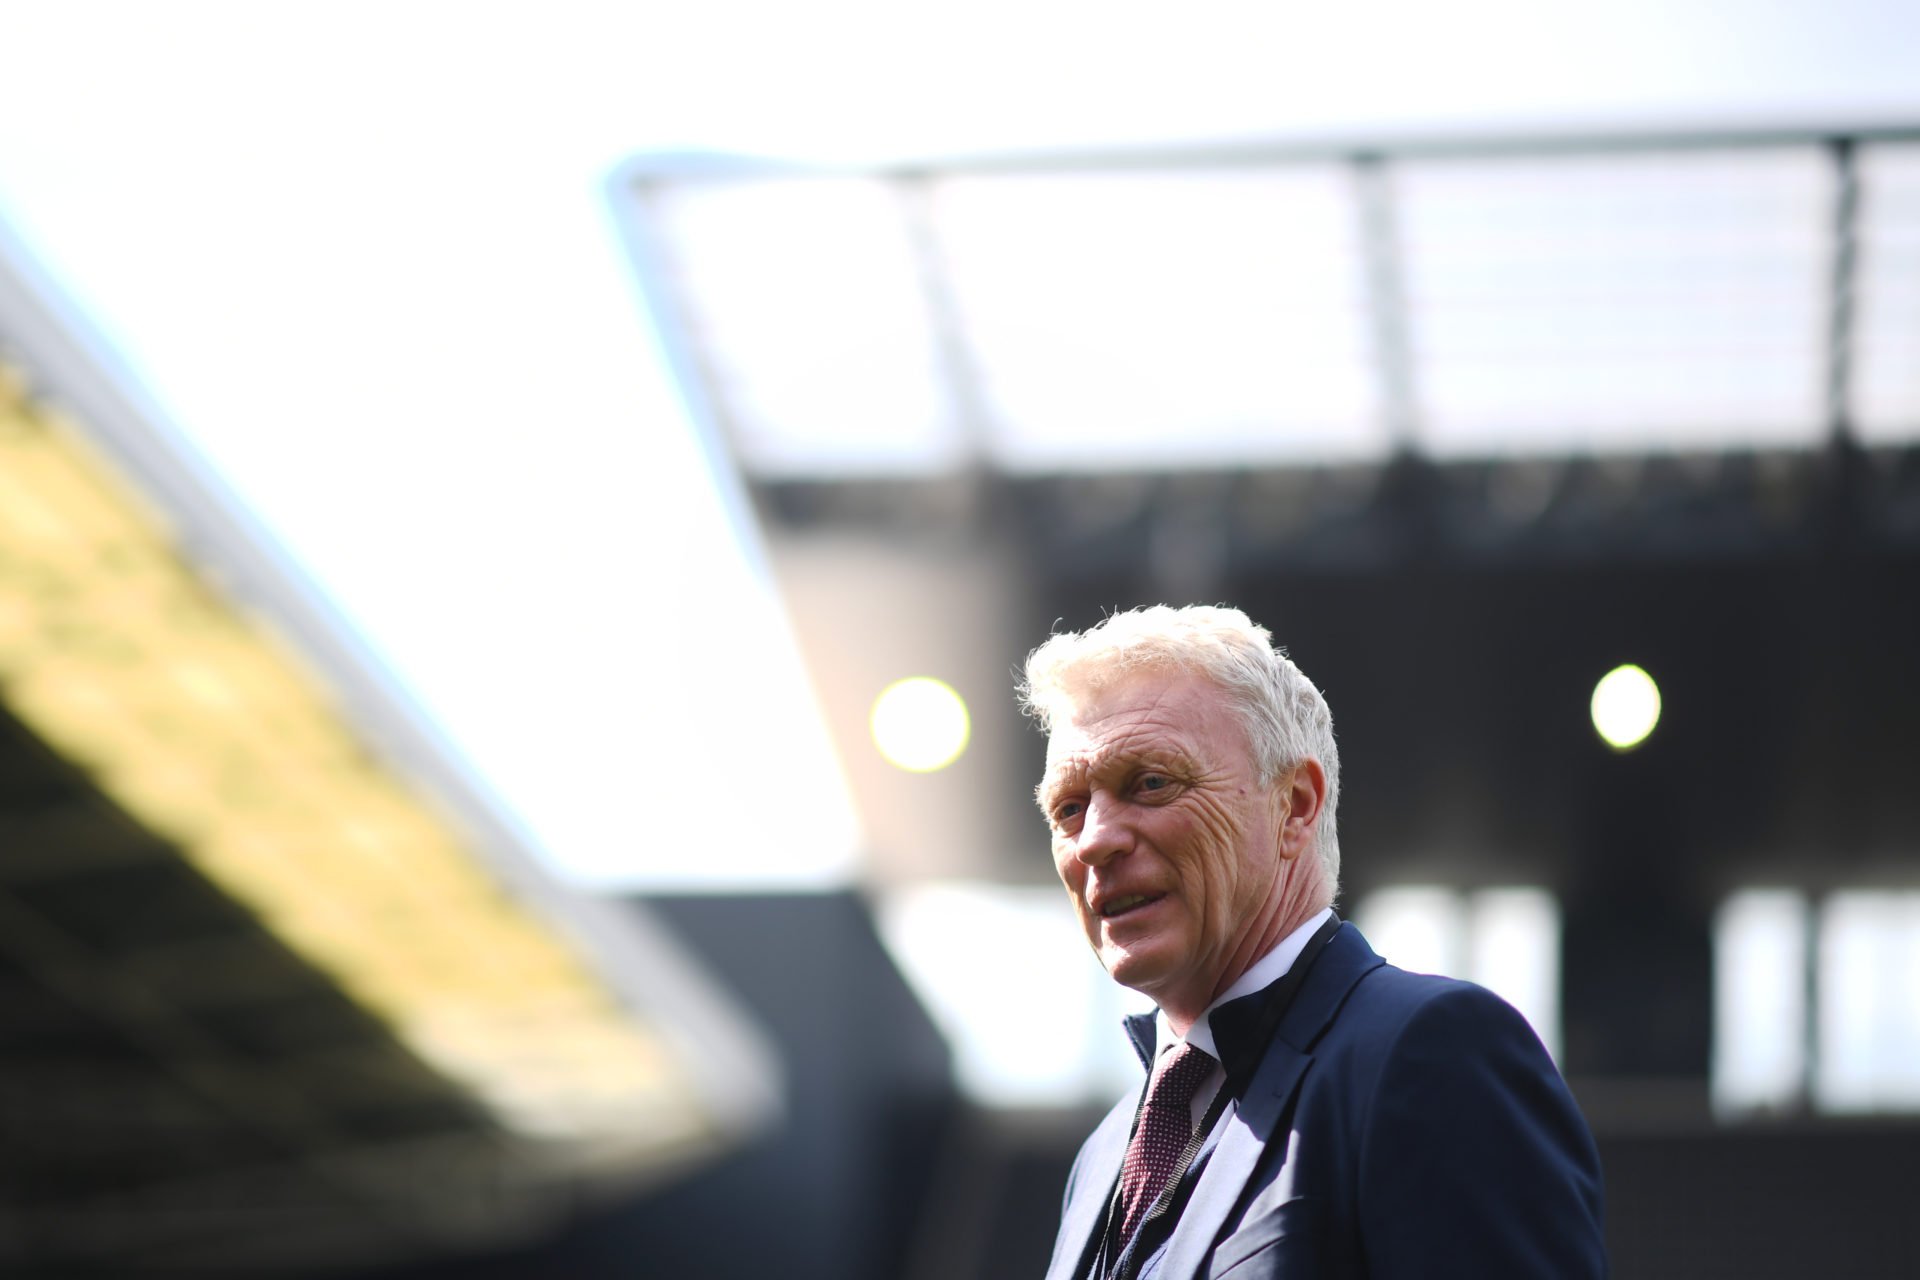 ‘I need to get us closer to our levels’ admits Moyes as boss dismisses claims